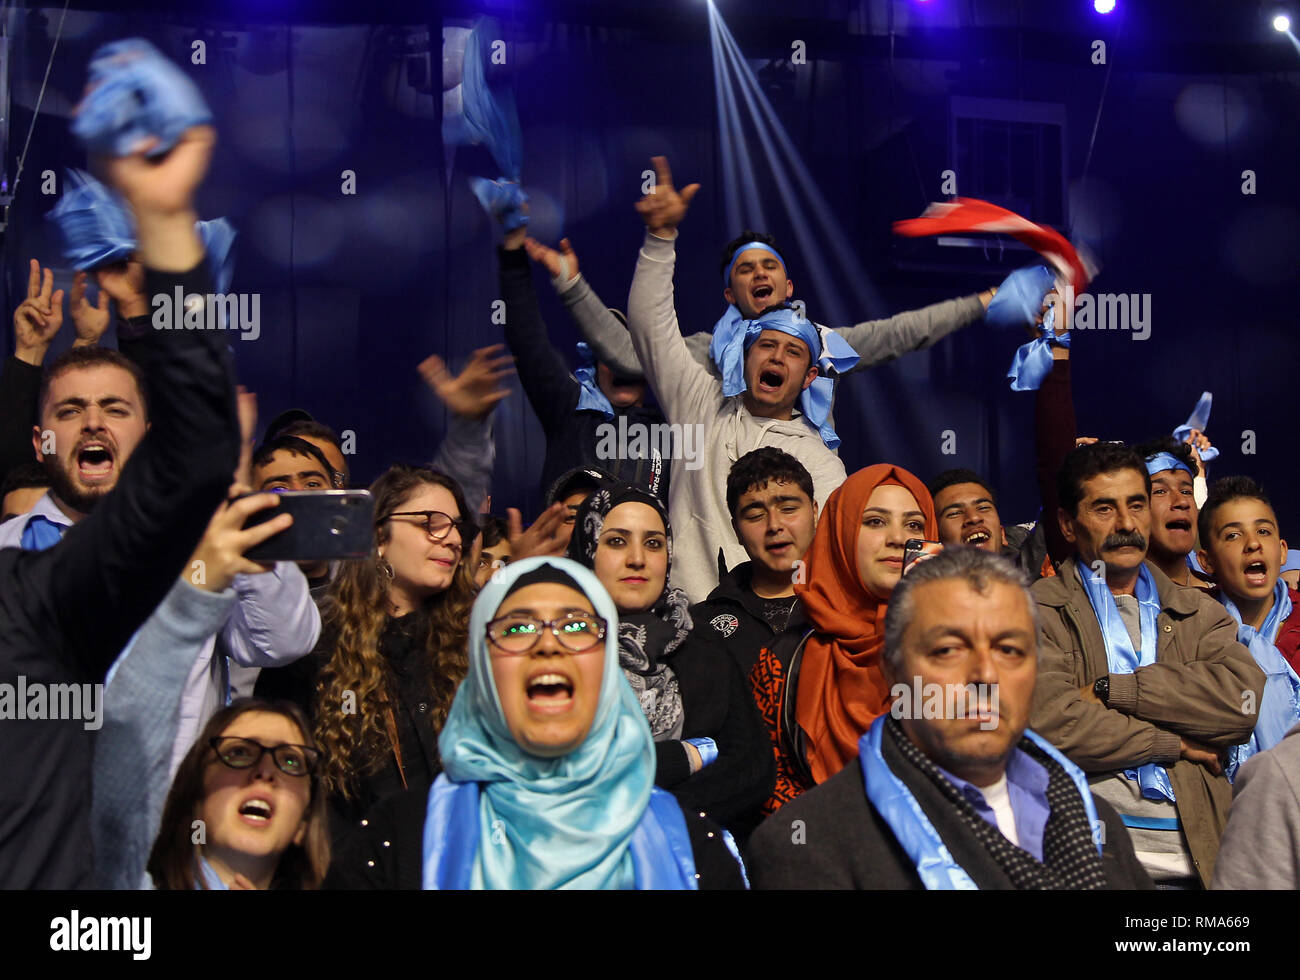 Beirut, Lebanon. 14th Feb, 2019. Supporters of Lebanese Prime Minister Saad Hariri cheer during a rally to mark the 14th anniversary of the assassination of former Prime Minister Rafic Hariri. Credit: Marwan Naamani/dpa/Alamy Live News Stock Photo